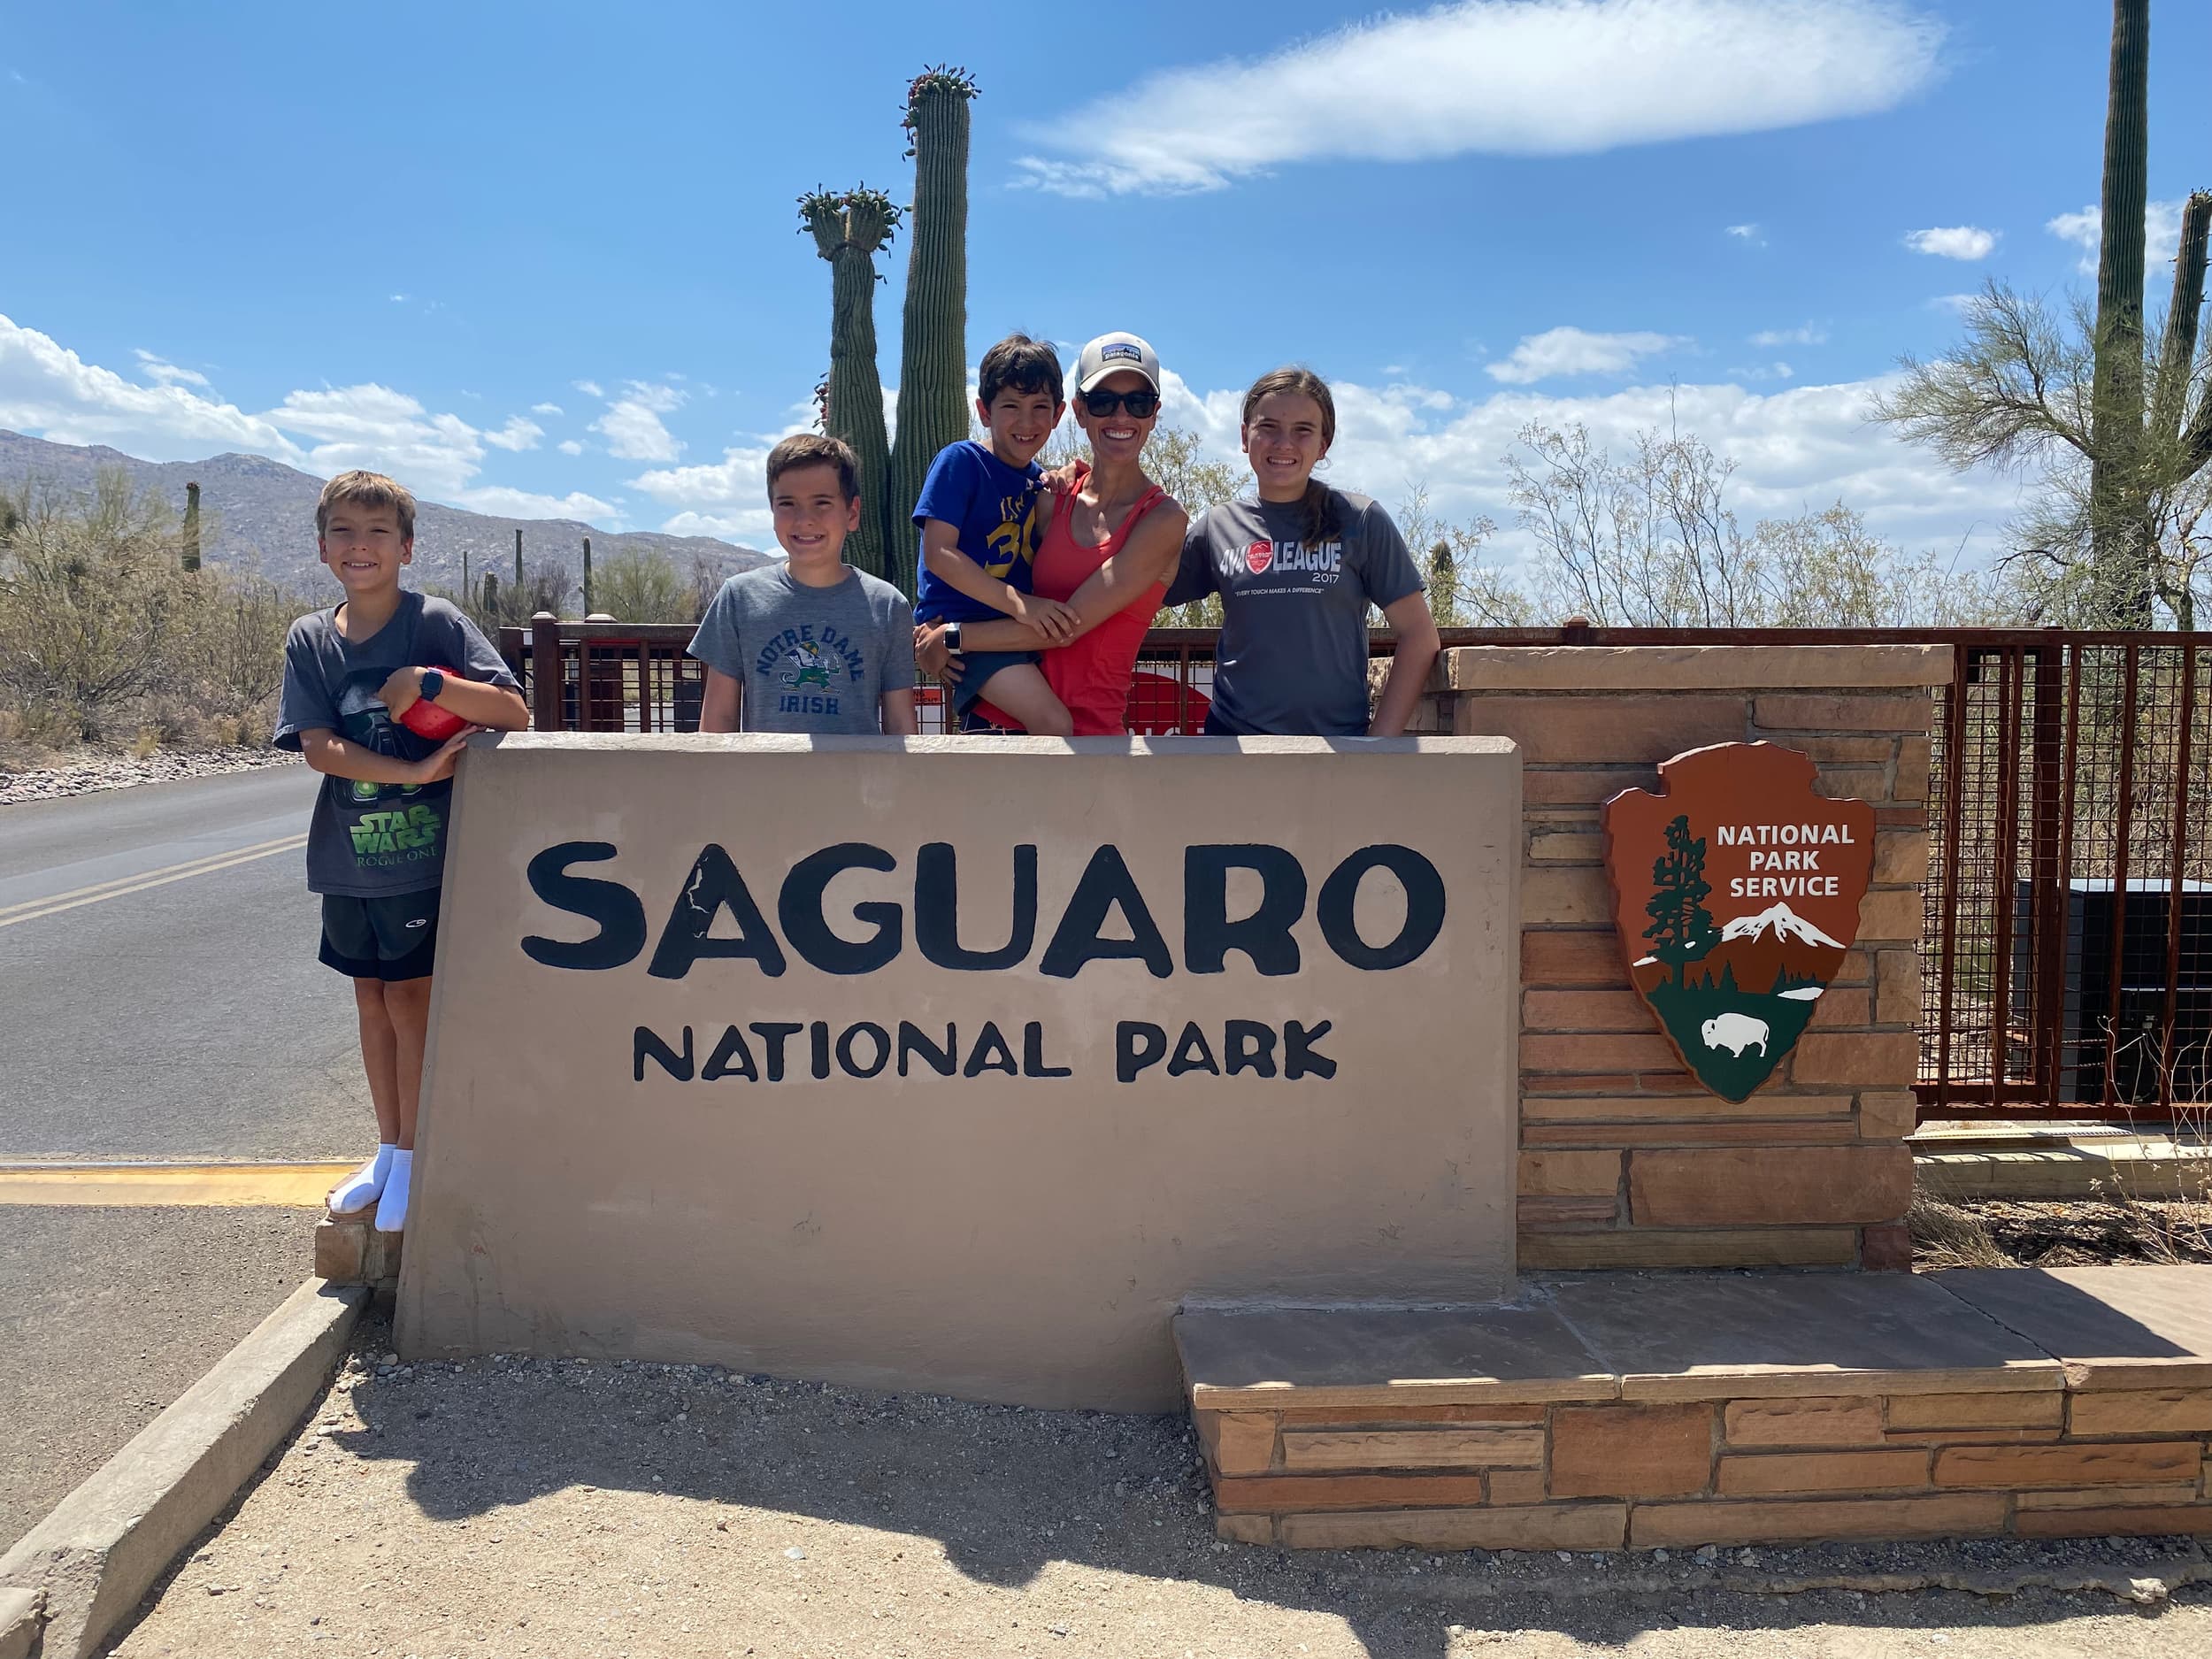 Visiting Saguaro National Park with Little Kids — A Mom Explores  Family  Travel Tips, Destination Guides with Kids, Family Vacation Ideas, and more!